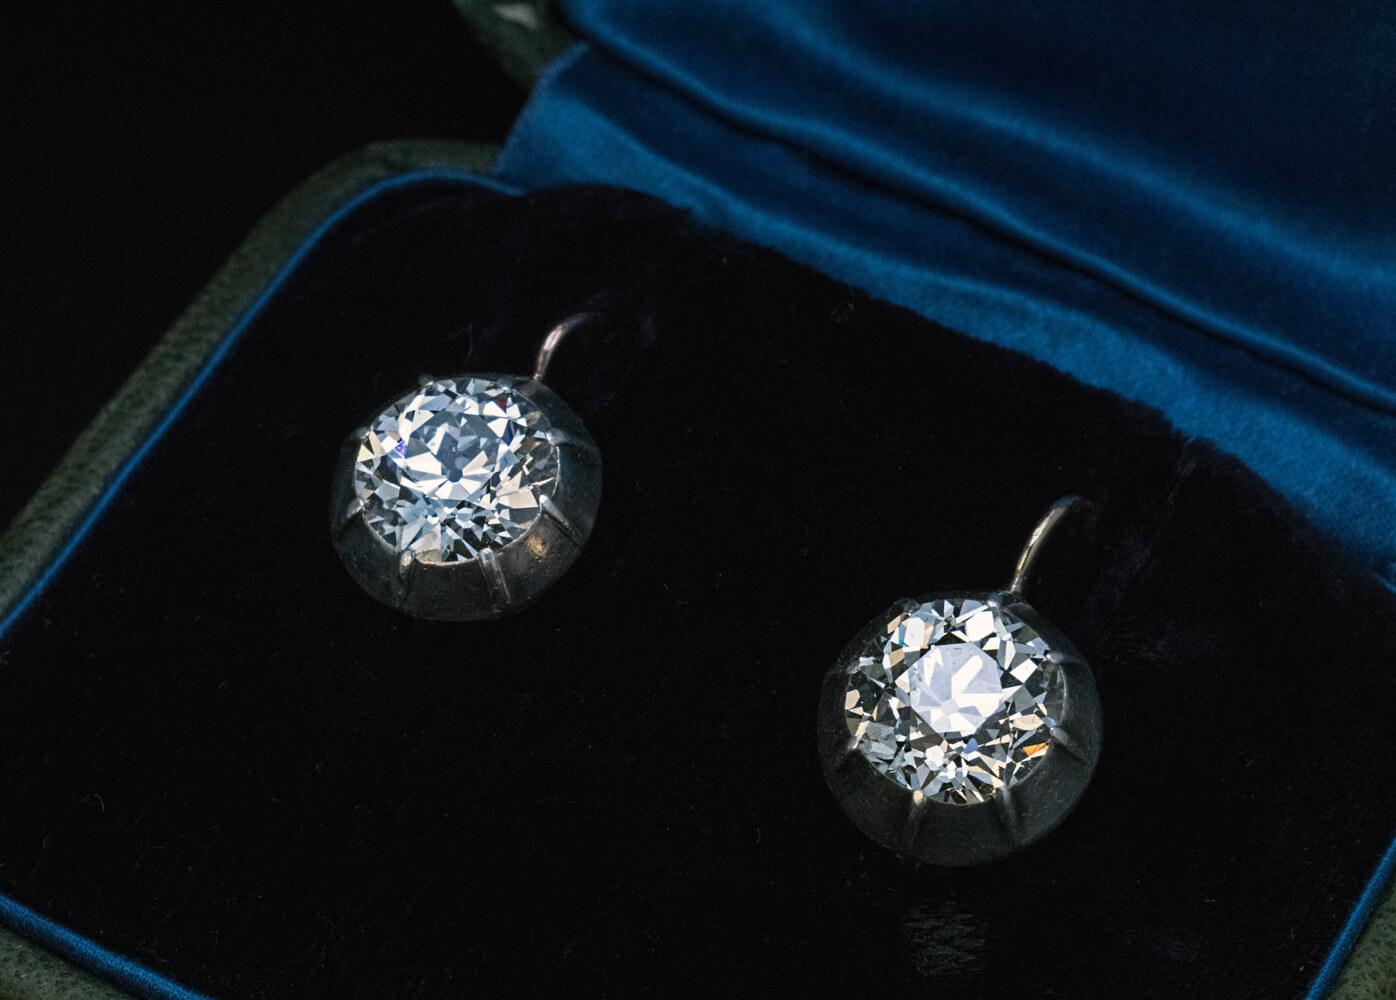 These early 1900s antique earrings are crafted in silver-topped 14K gold (front – silver, back – gold). The earrings are set with two high quality Old European cut diamonds: 8.86 – 8.64 x 5.70 mm, approximately 2.89 ct, I-J color, VS1 clarity and